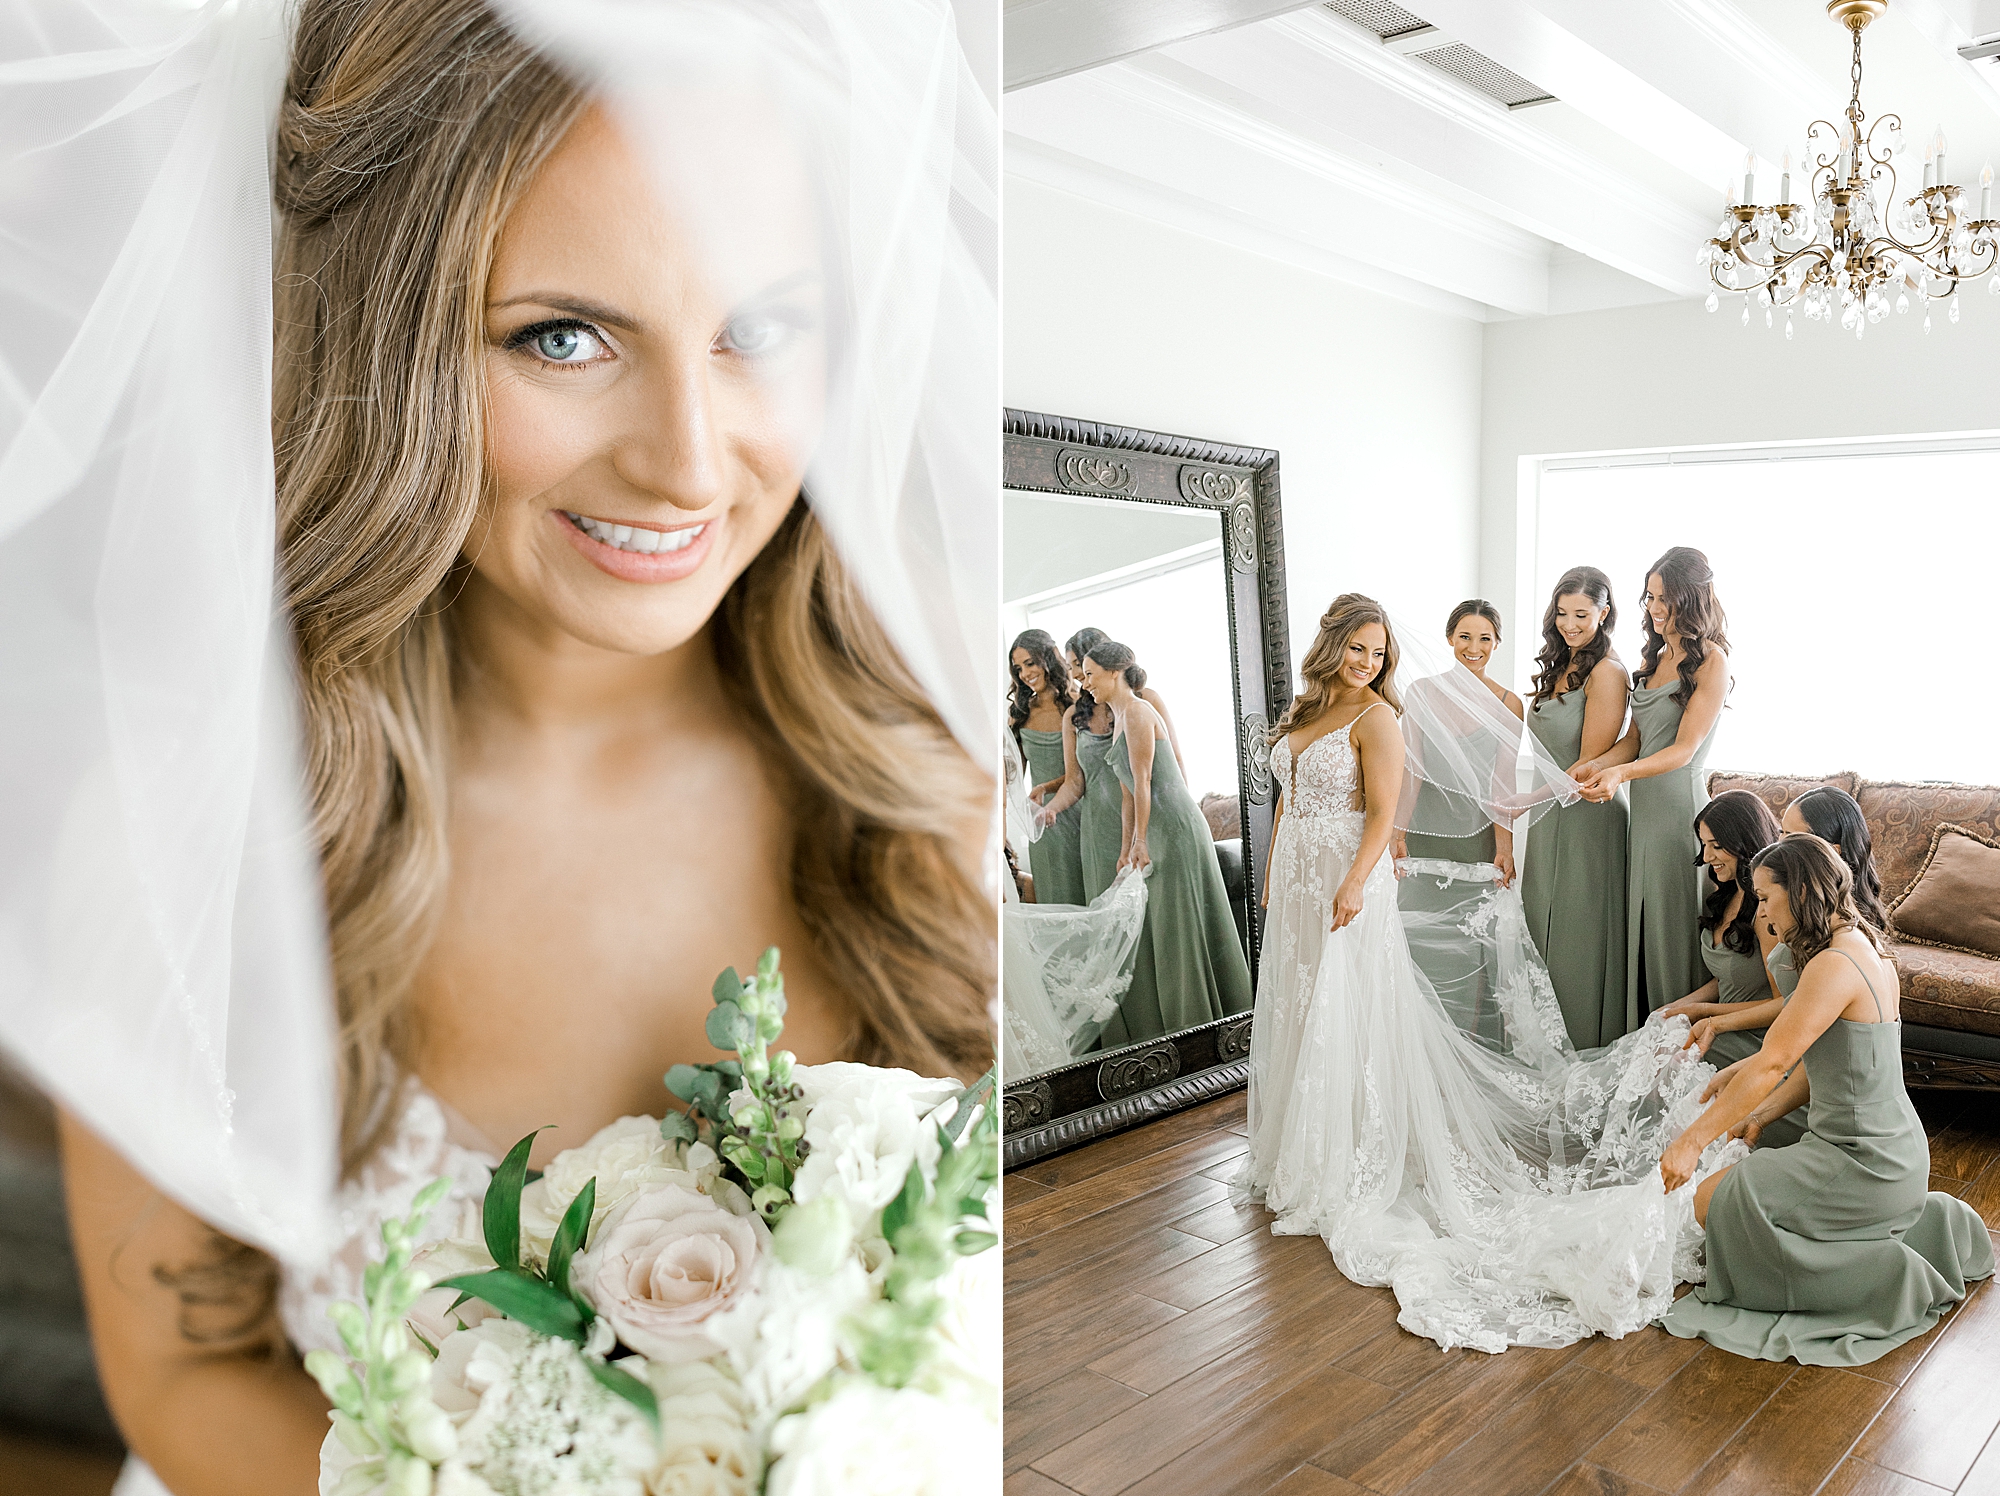 bride smiles from under veil and bridesmaids in green gowns adjust bride's dress and train